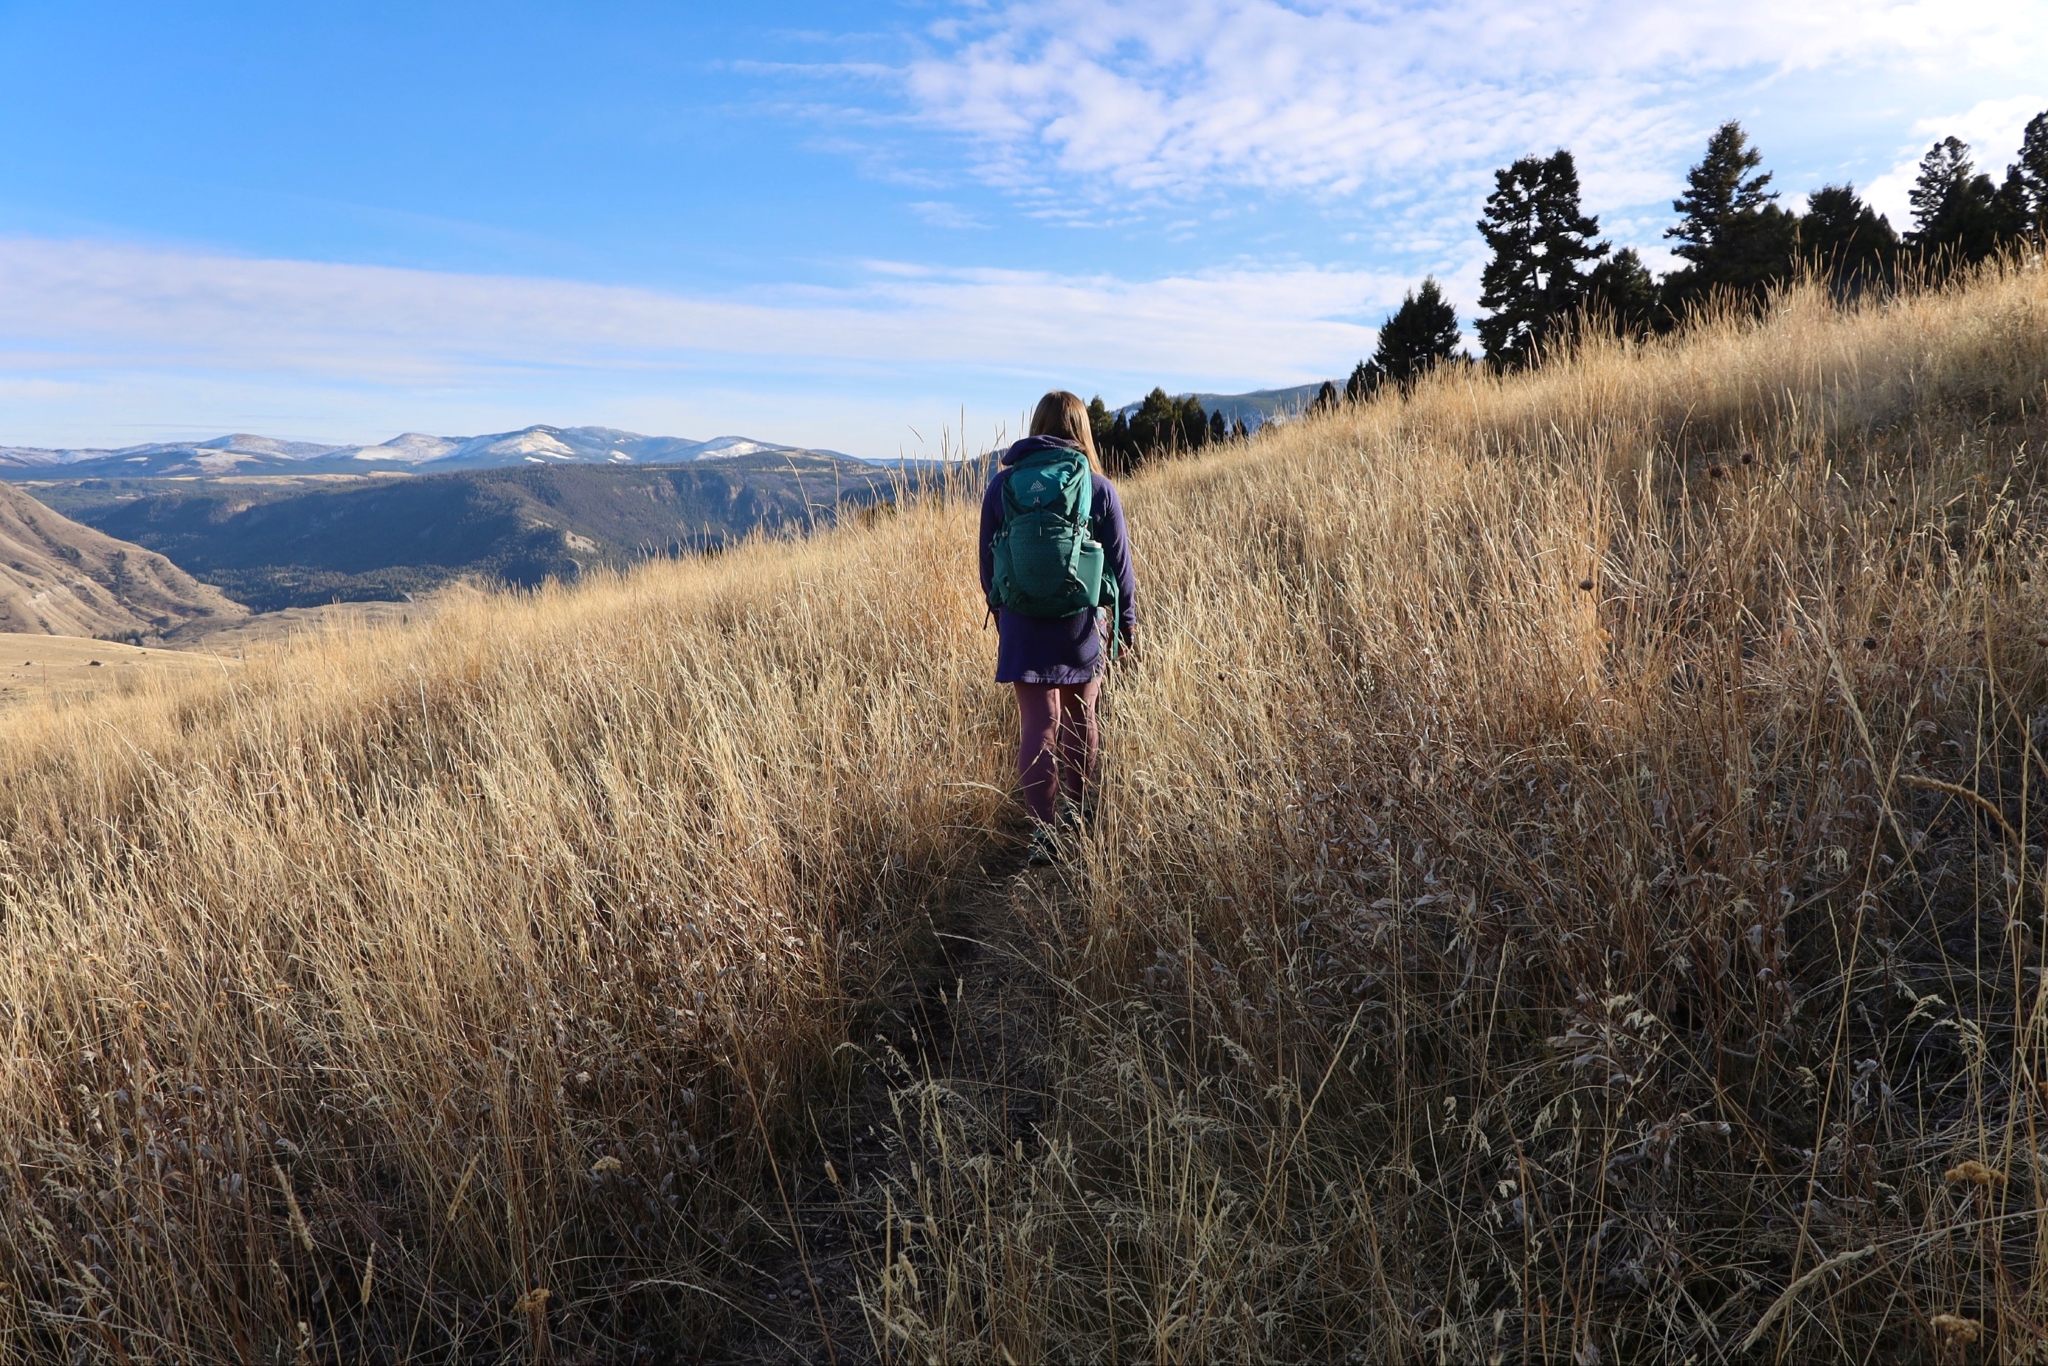 A woman hikes in a field of golden grass with snowcapped mountains in the distance.